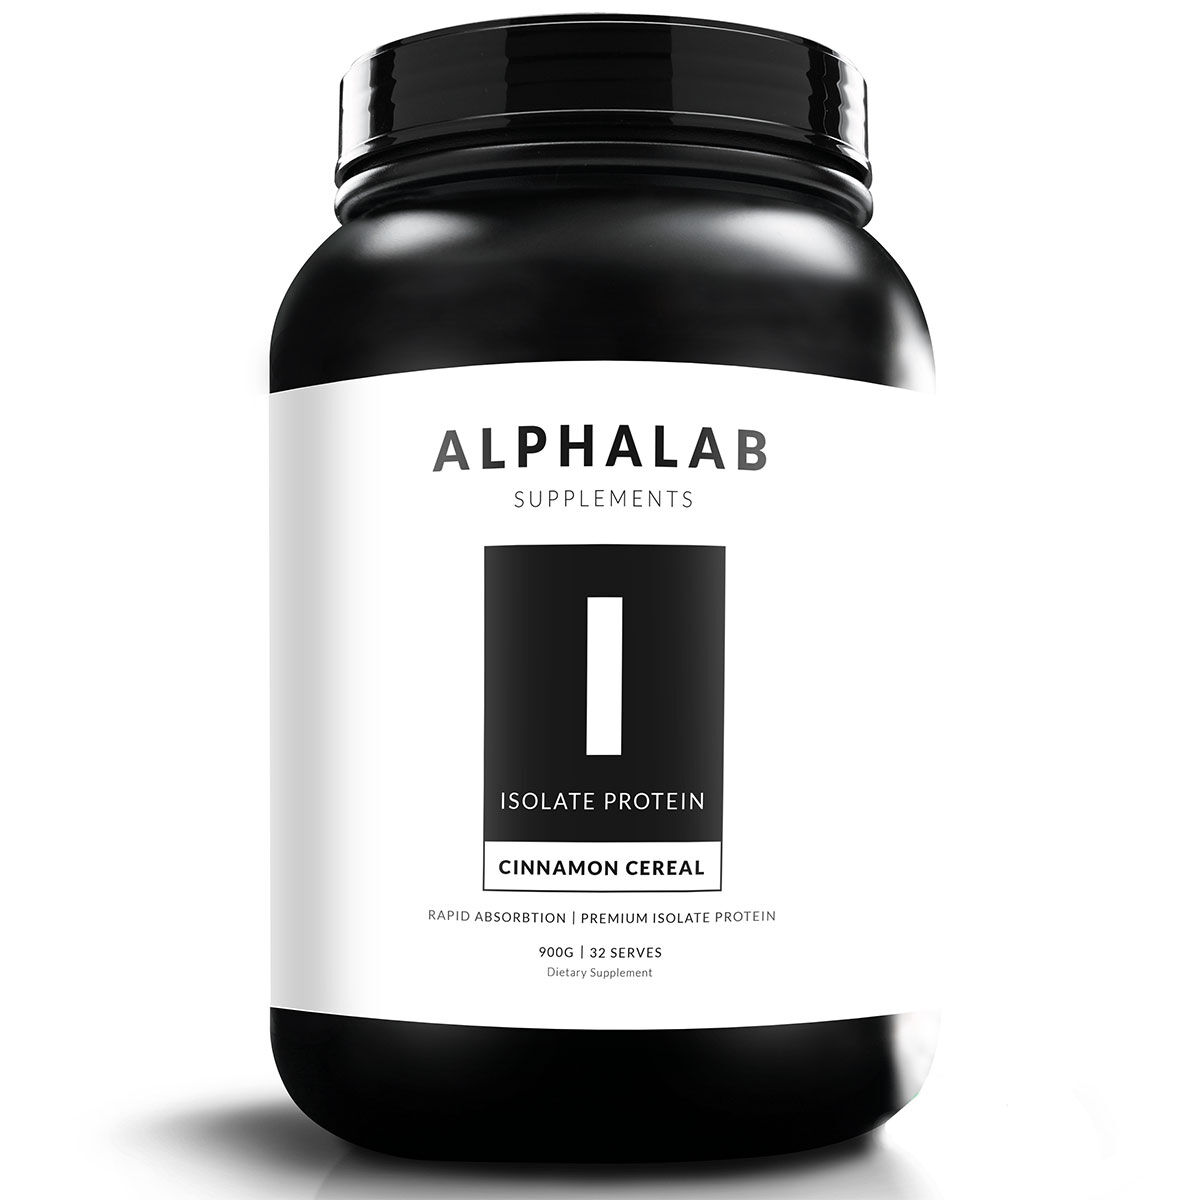 Alphalab Isolate Protein